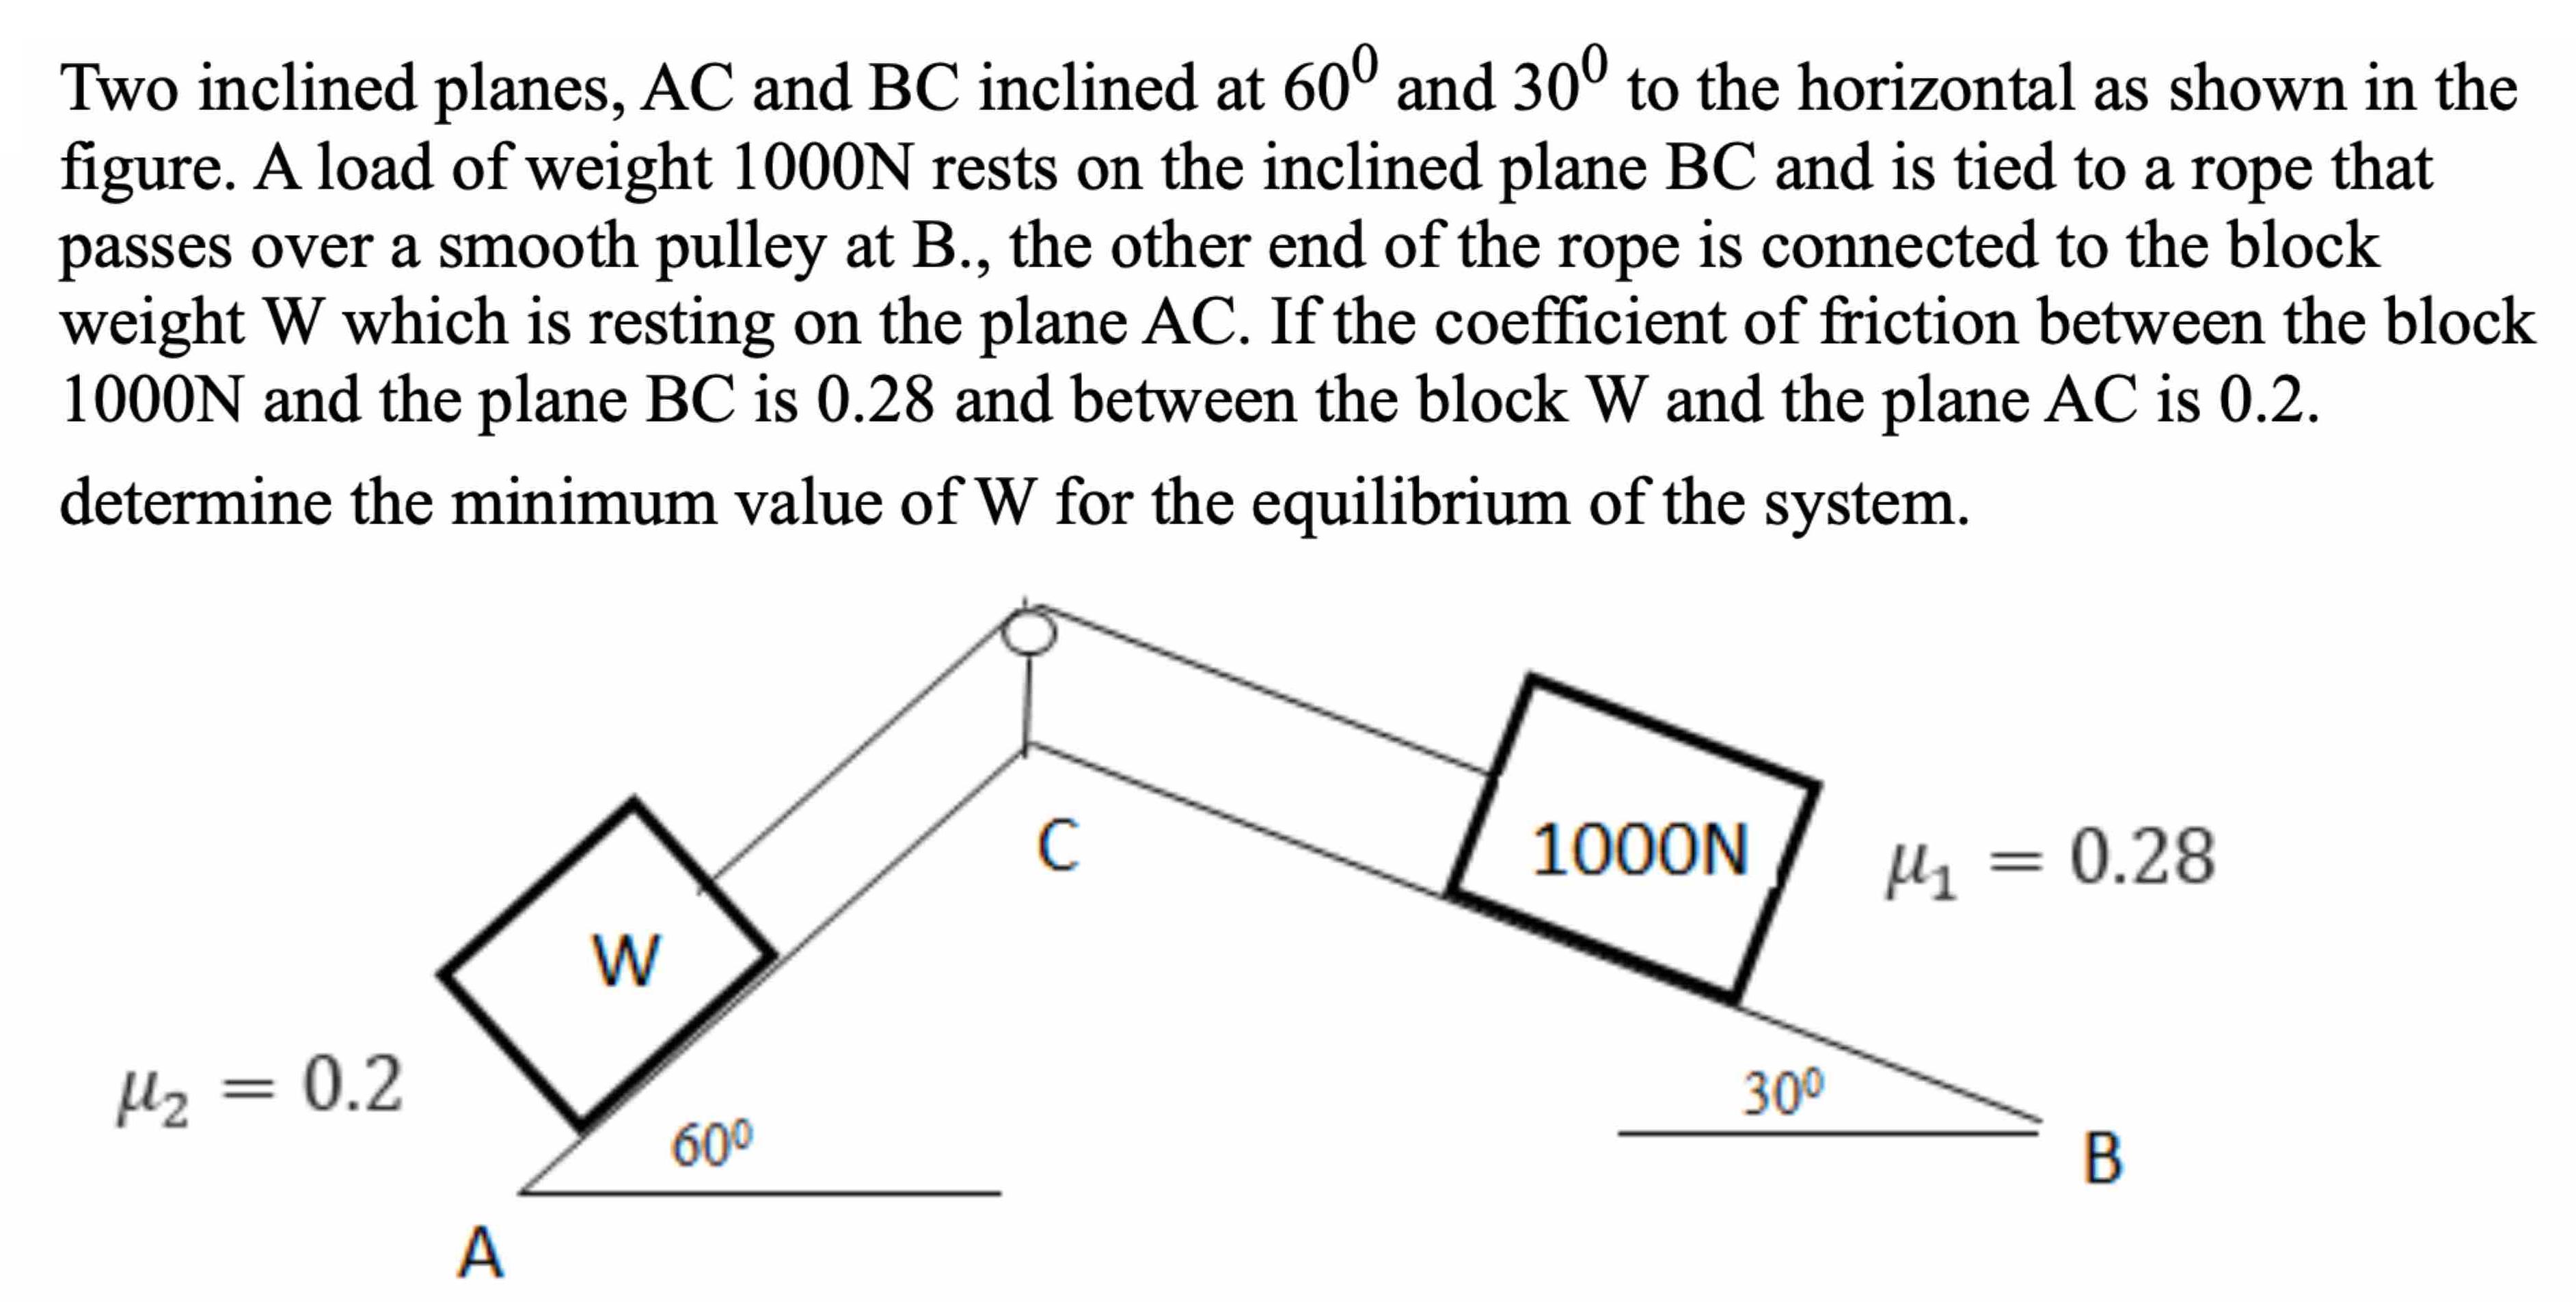 Two inclined planes, AC and BC inclined at 600 and 30 to the horizontal as shown in the figure. A load of